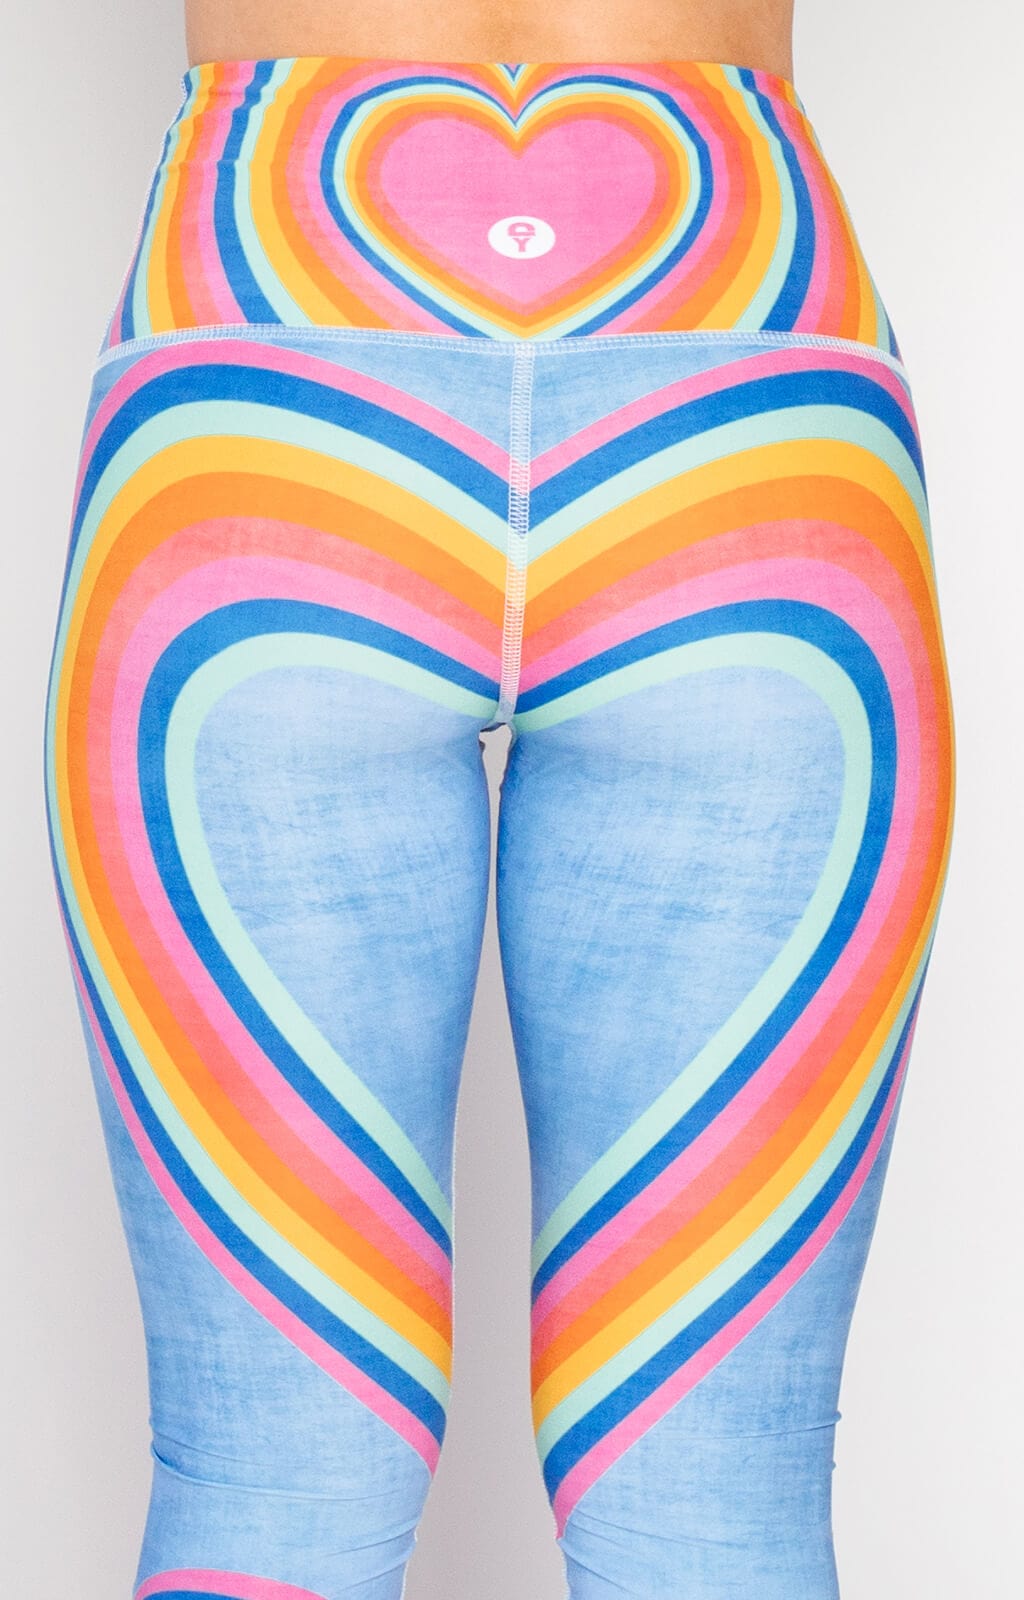 Cake Sprinkles Yoga Leggings Woman Running Capris Pants Jimmies Rainbow  Workout Athletic Sports Birthday Party Activewear 